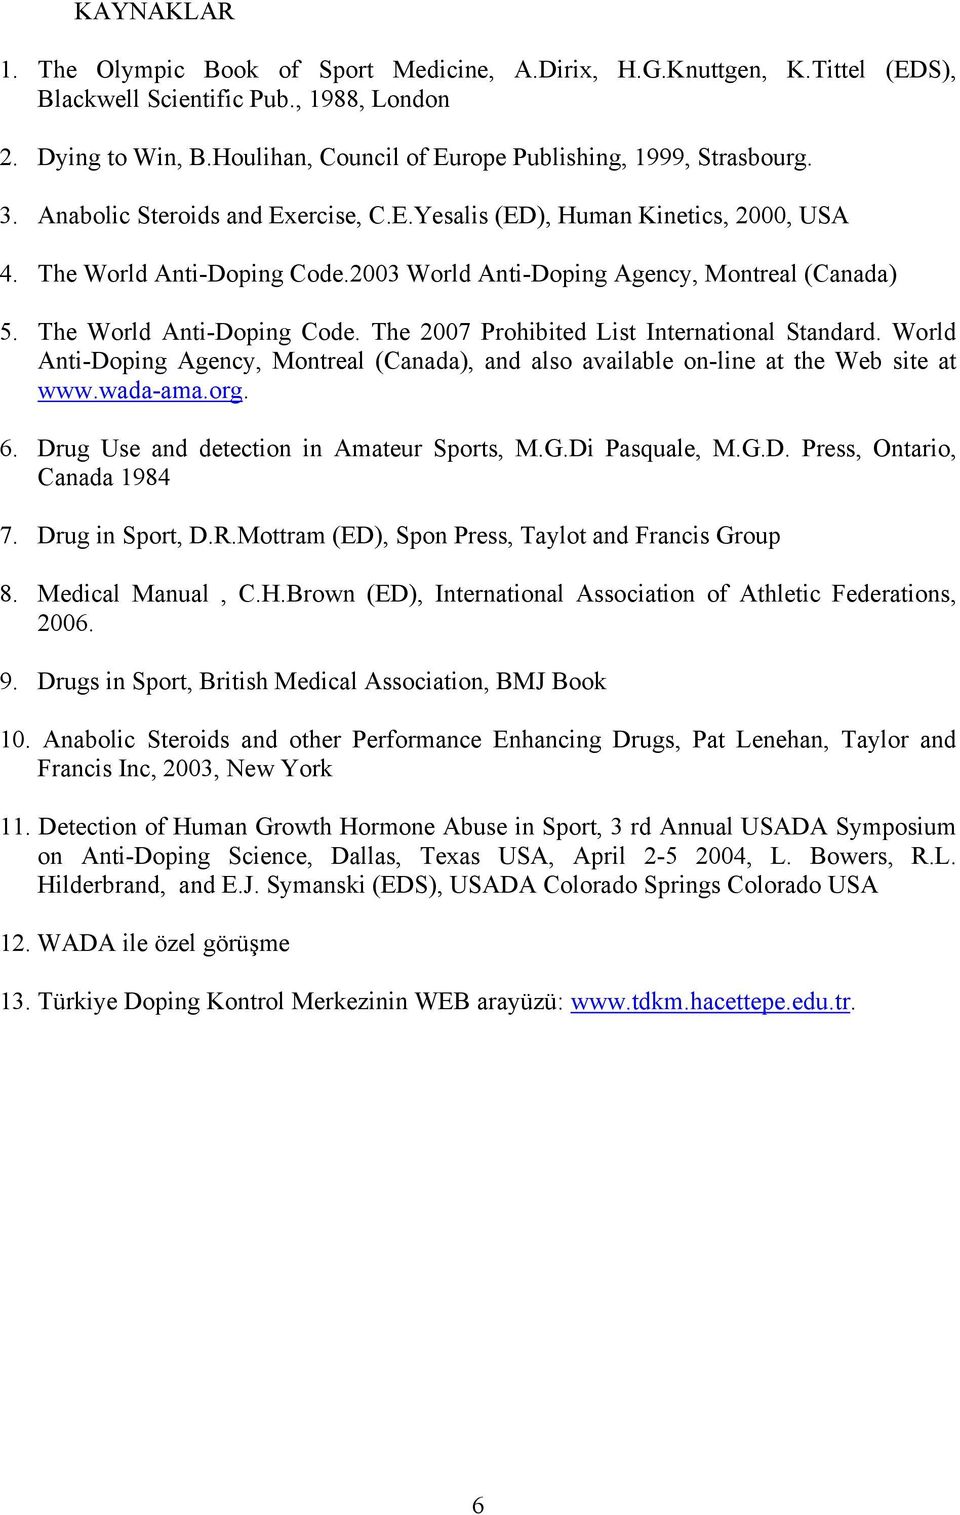 2003 World Anti-Doping Agency, Montreal (Canada) 5. The World Anti-Doping Code. The 2007 Prohibited List International Standard.